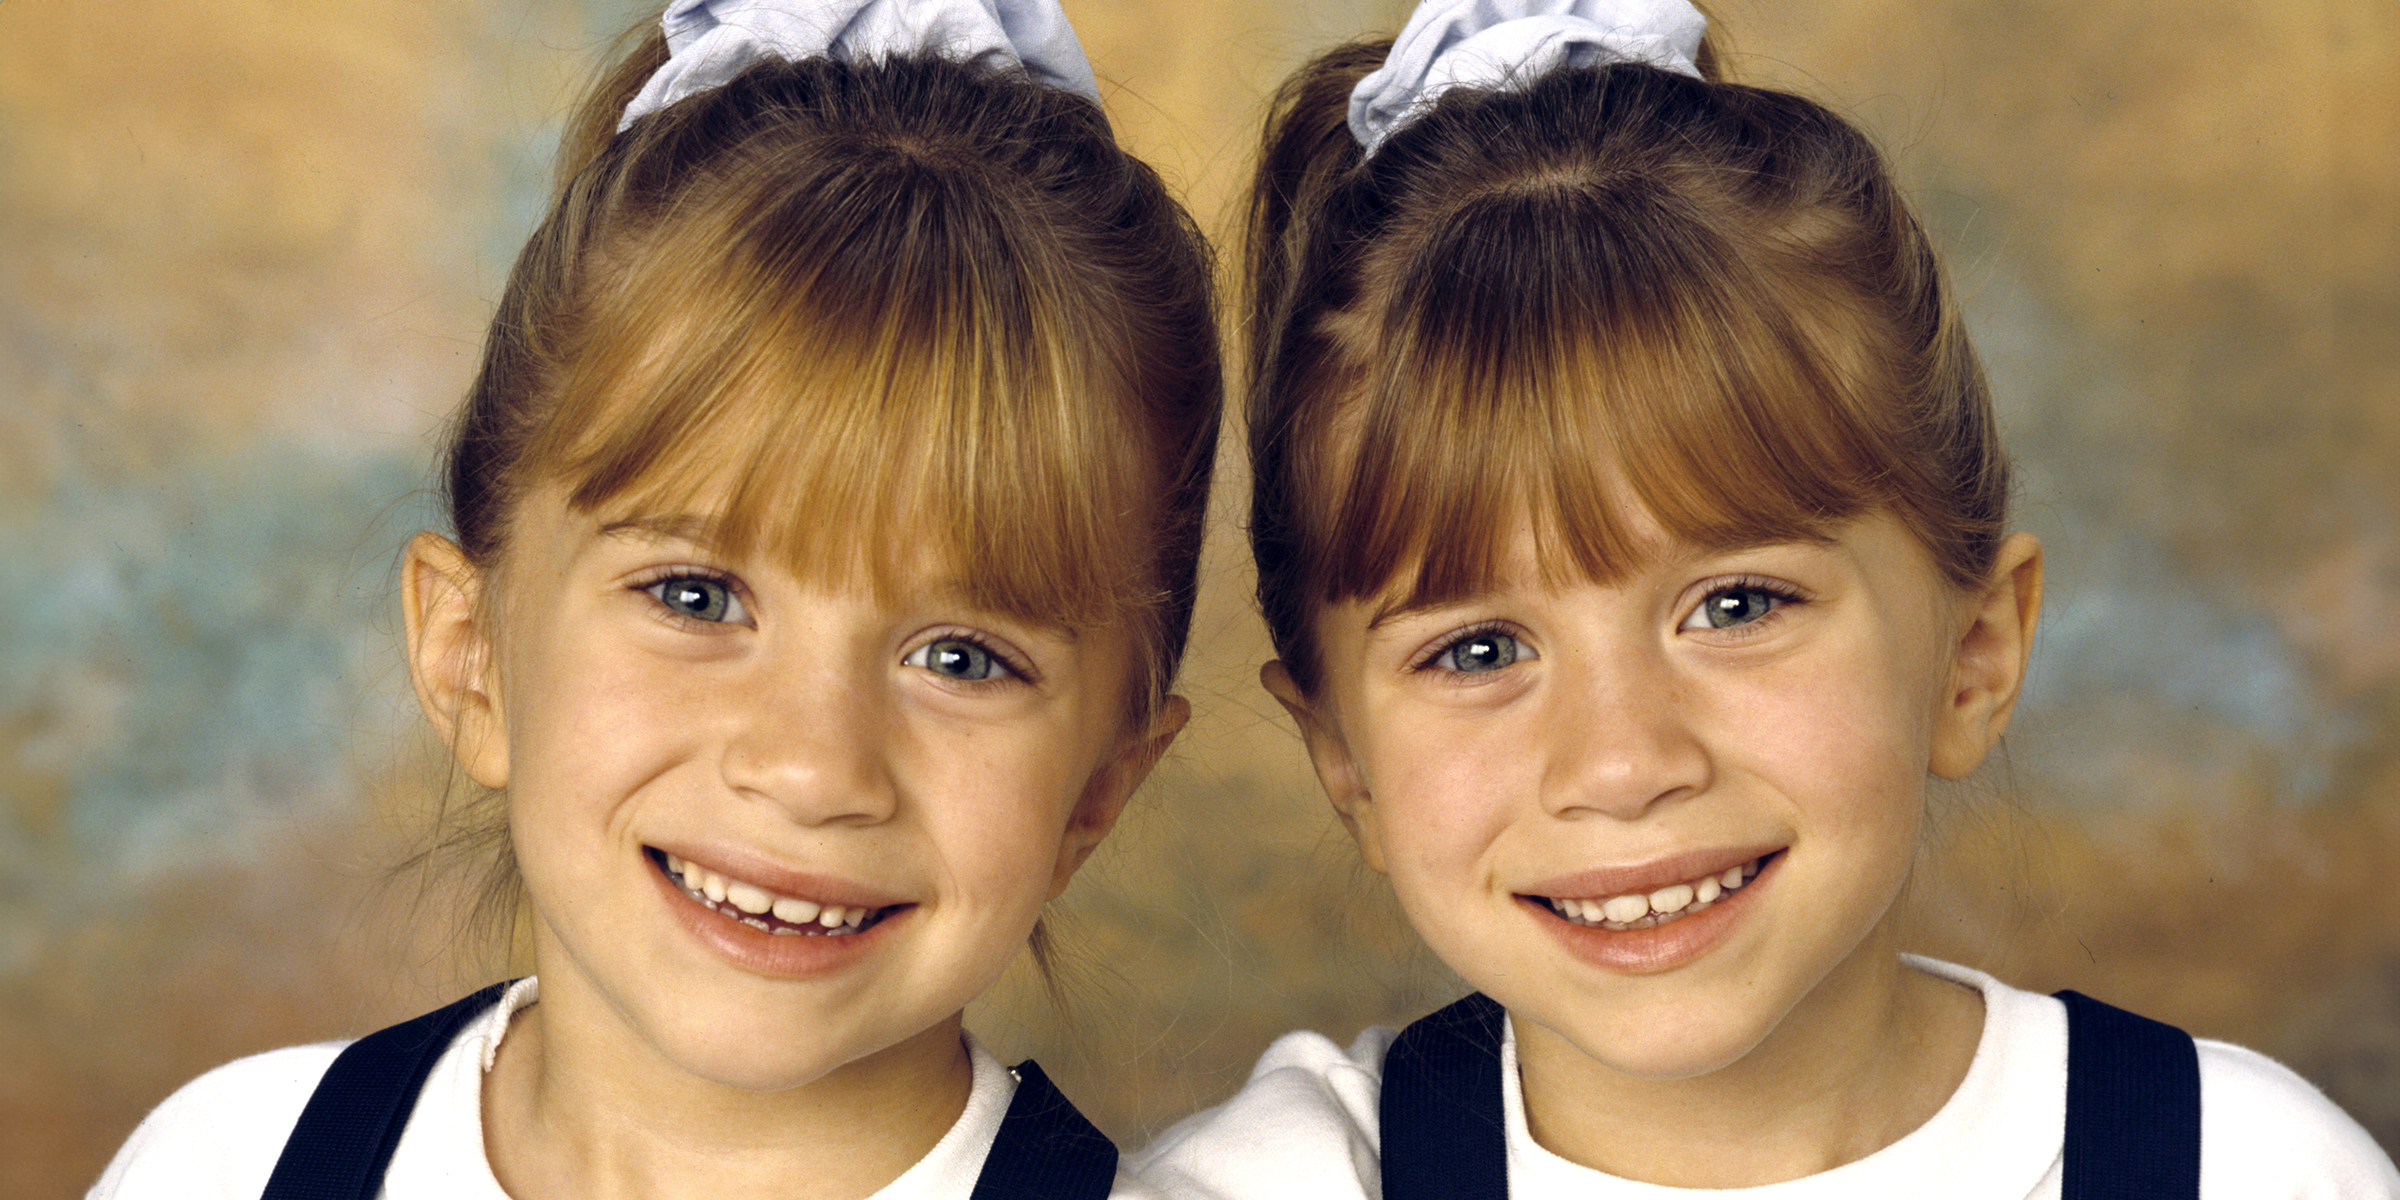 Mary Kate y Ashley Olsen, 1993 | Fuente: Getty Images